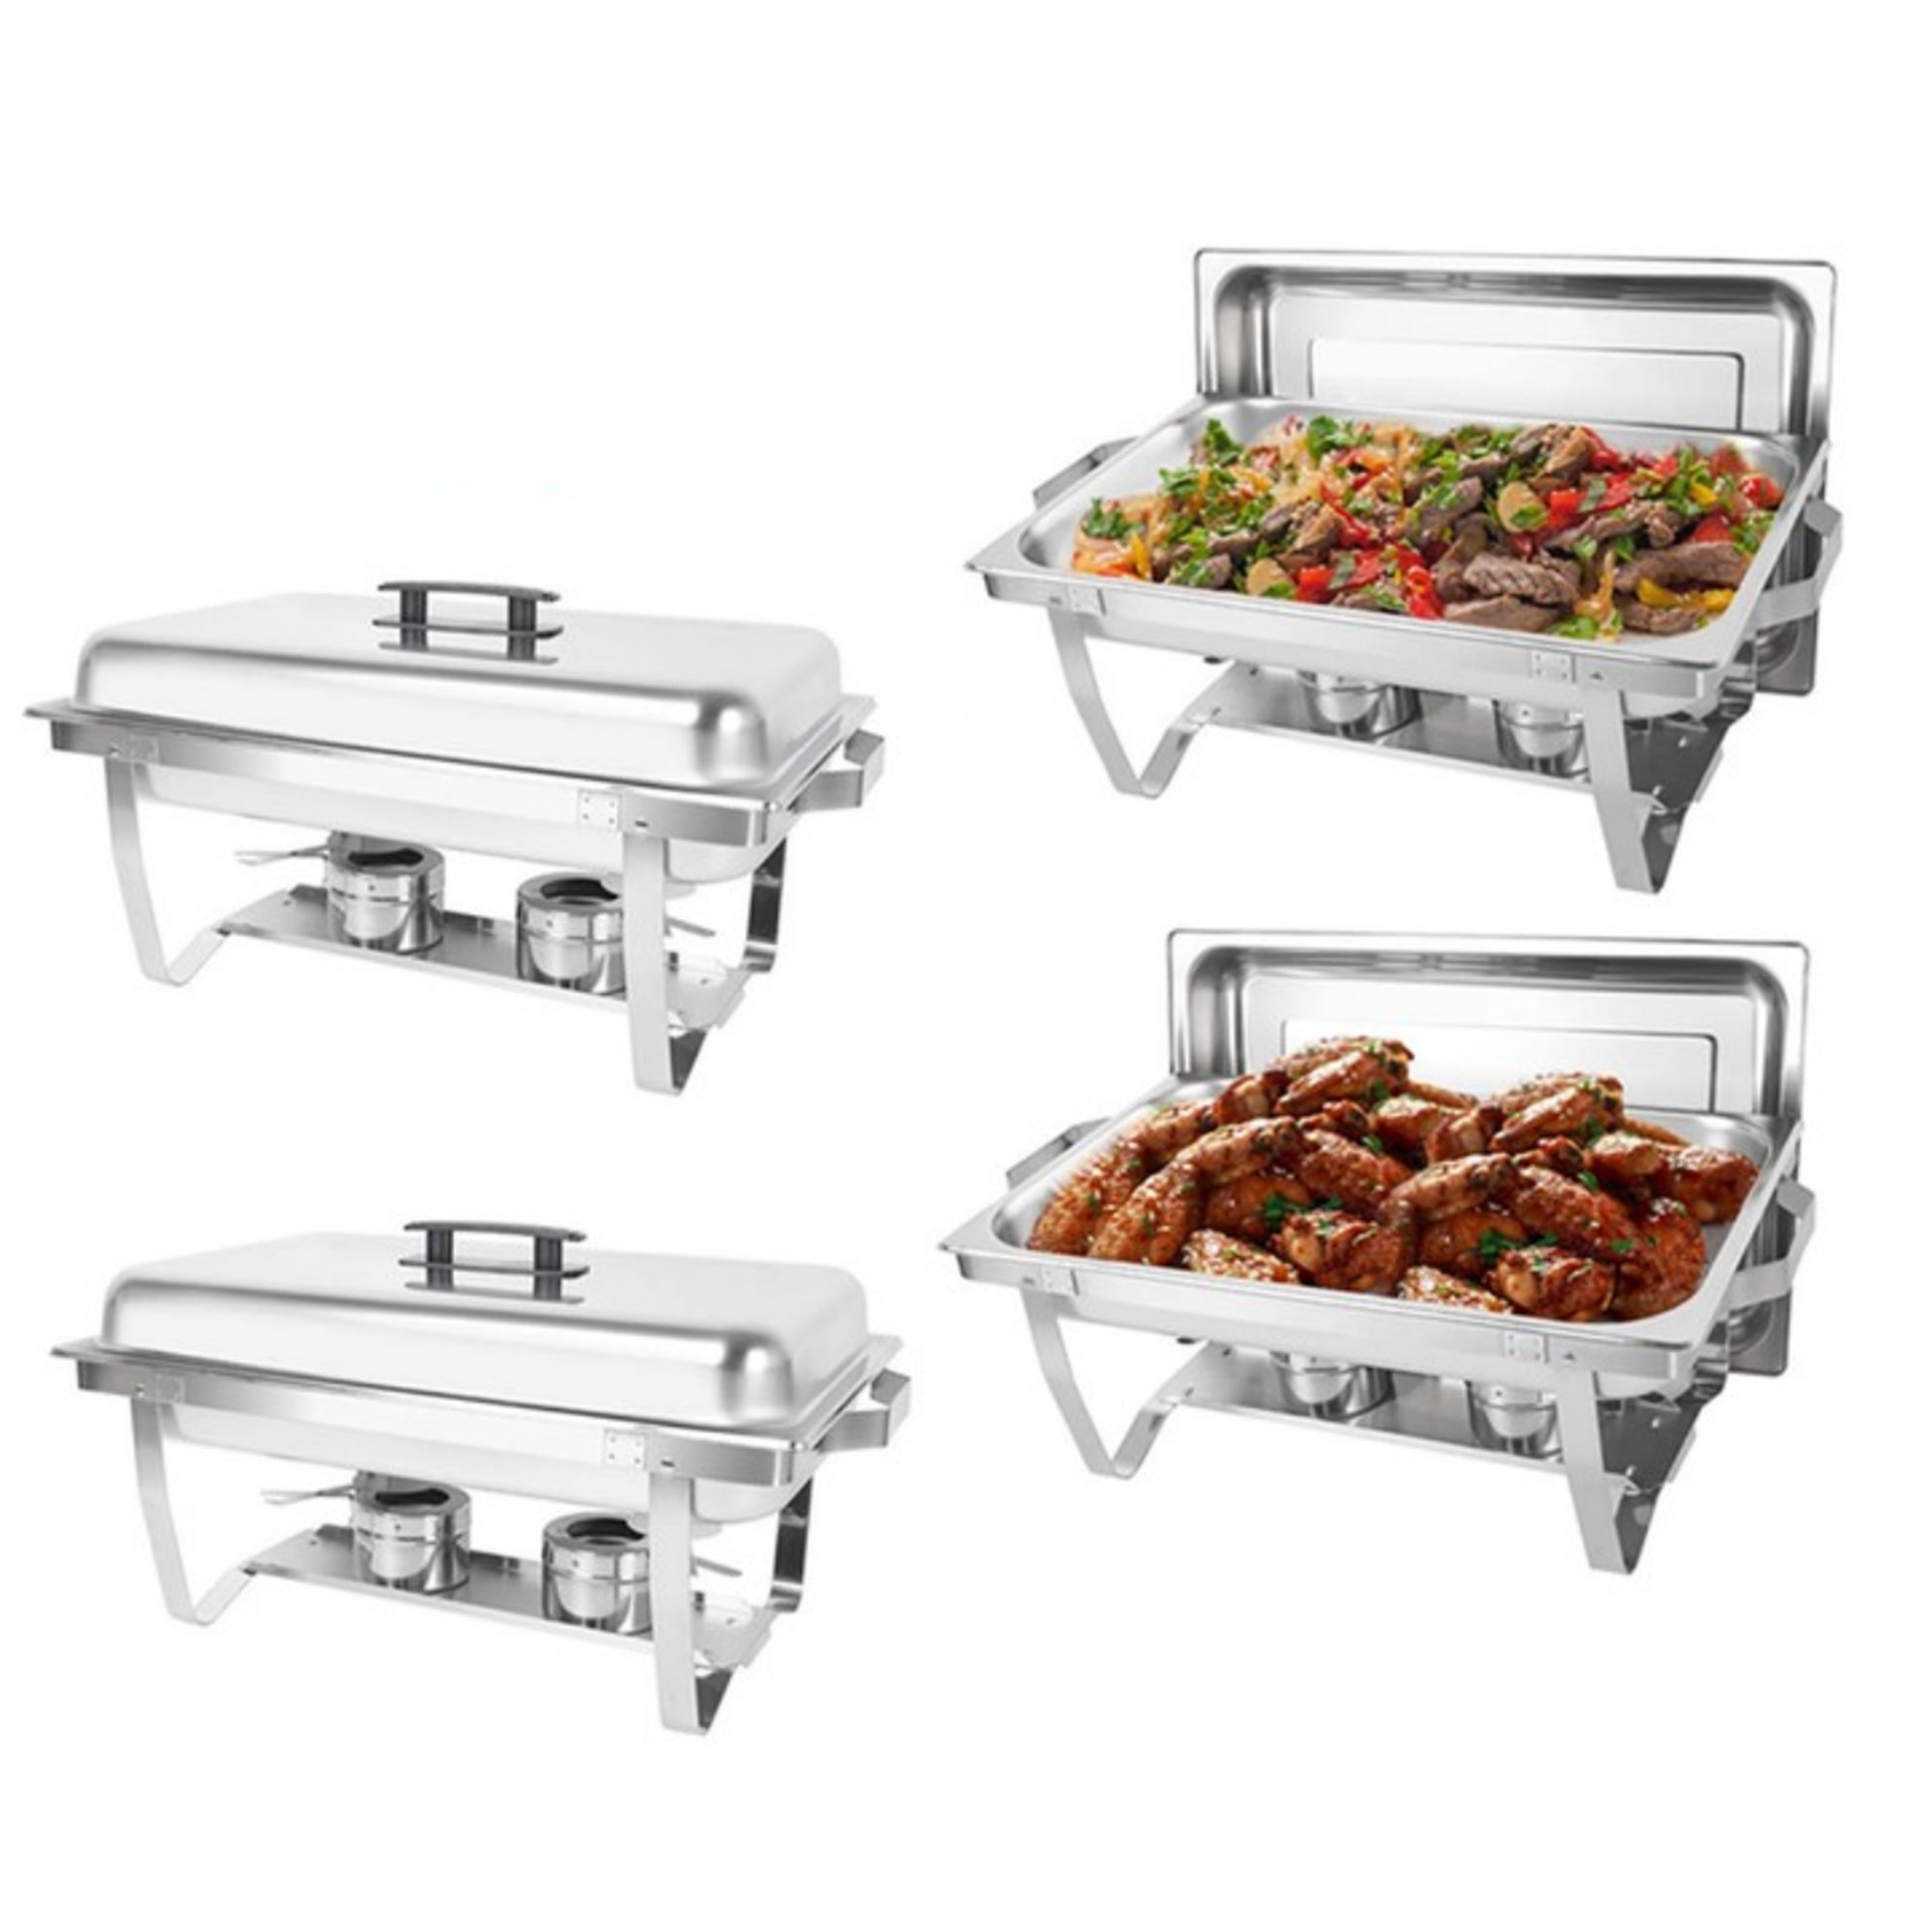 4 Pack Chafing Dish Buffet Set 8 Qt Stainless Steel Complete Chafer Set  Catering Warmer Set with Water Pan, Fuel Holder for Parties, Dinners